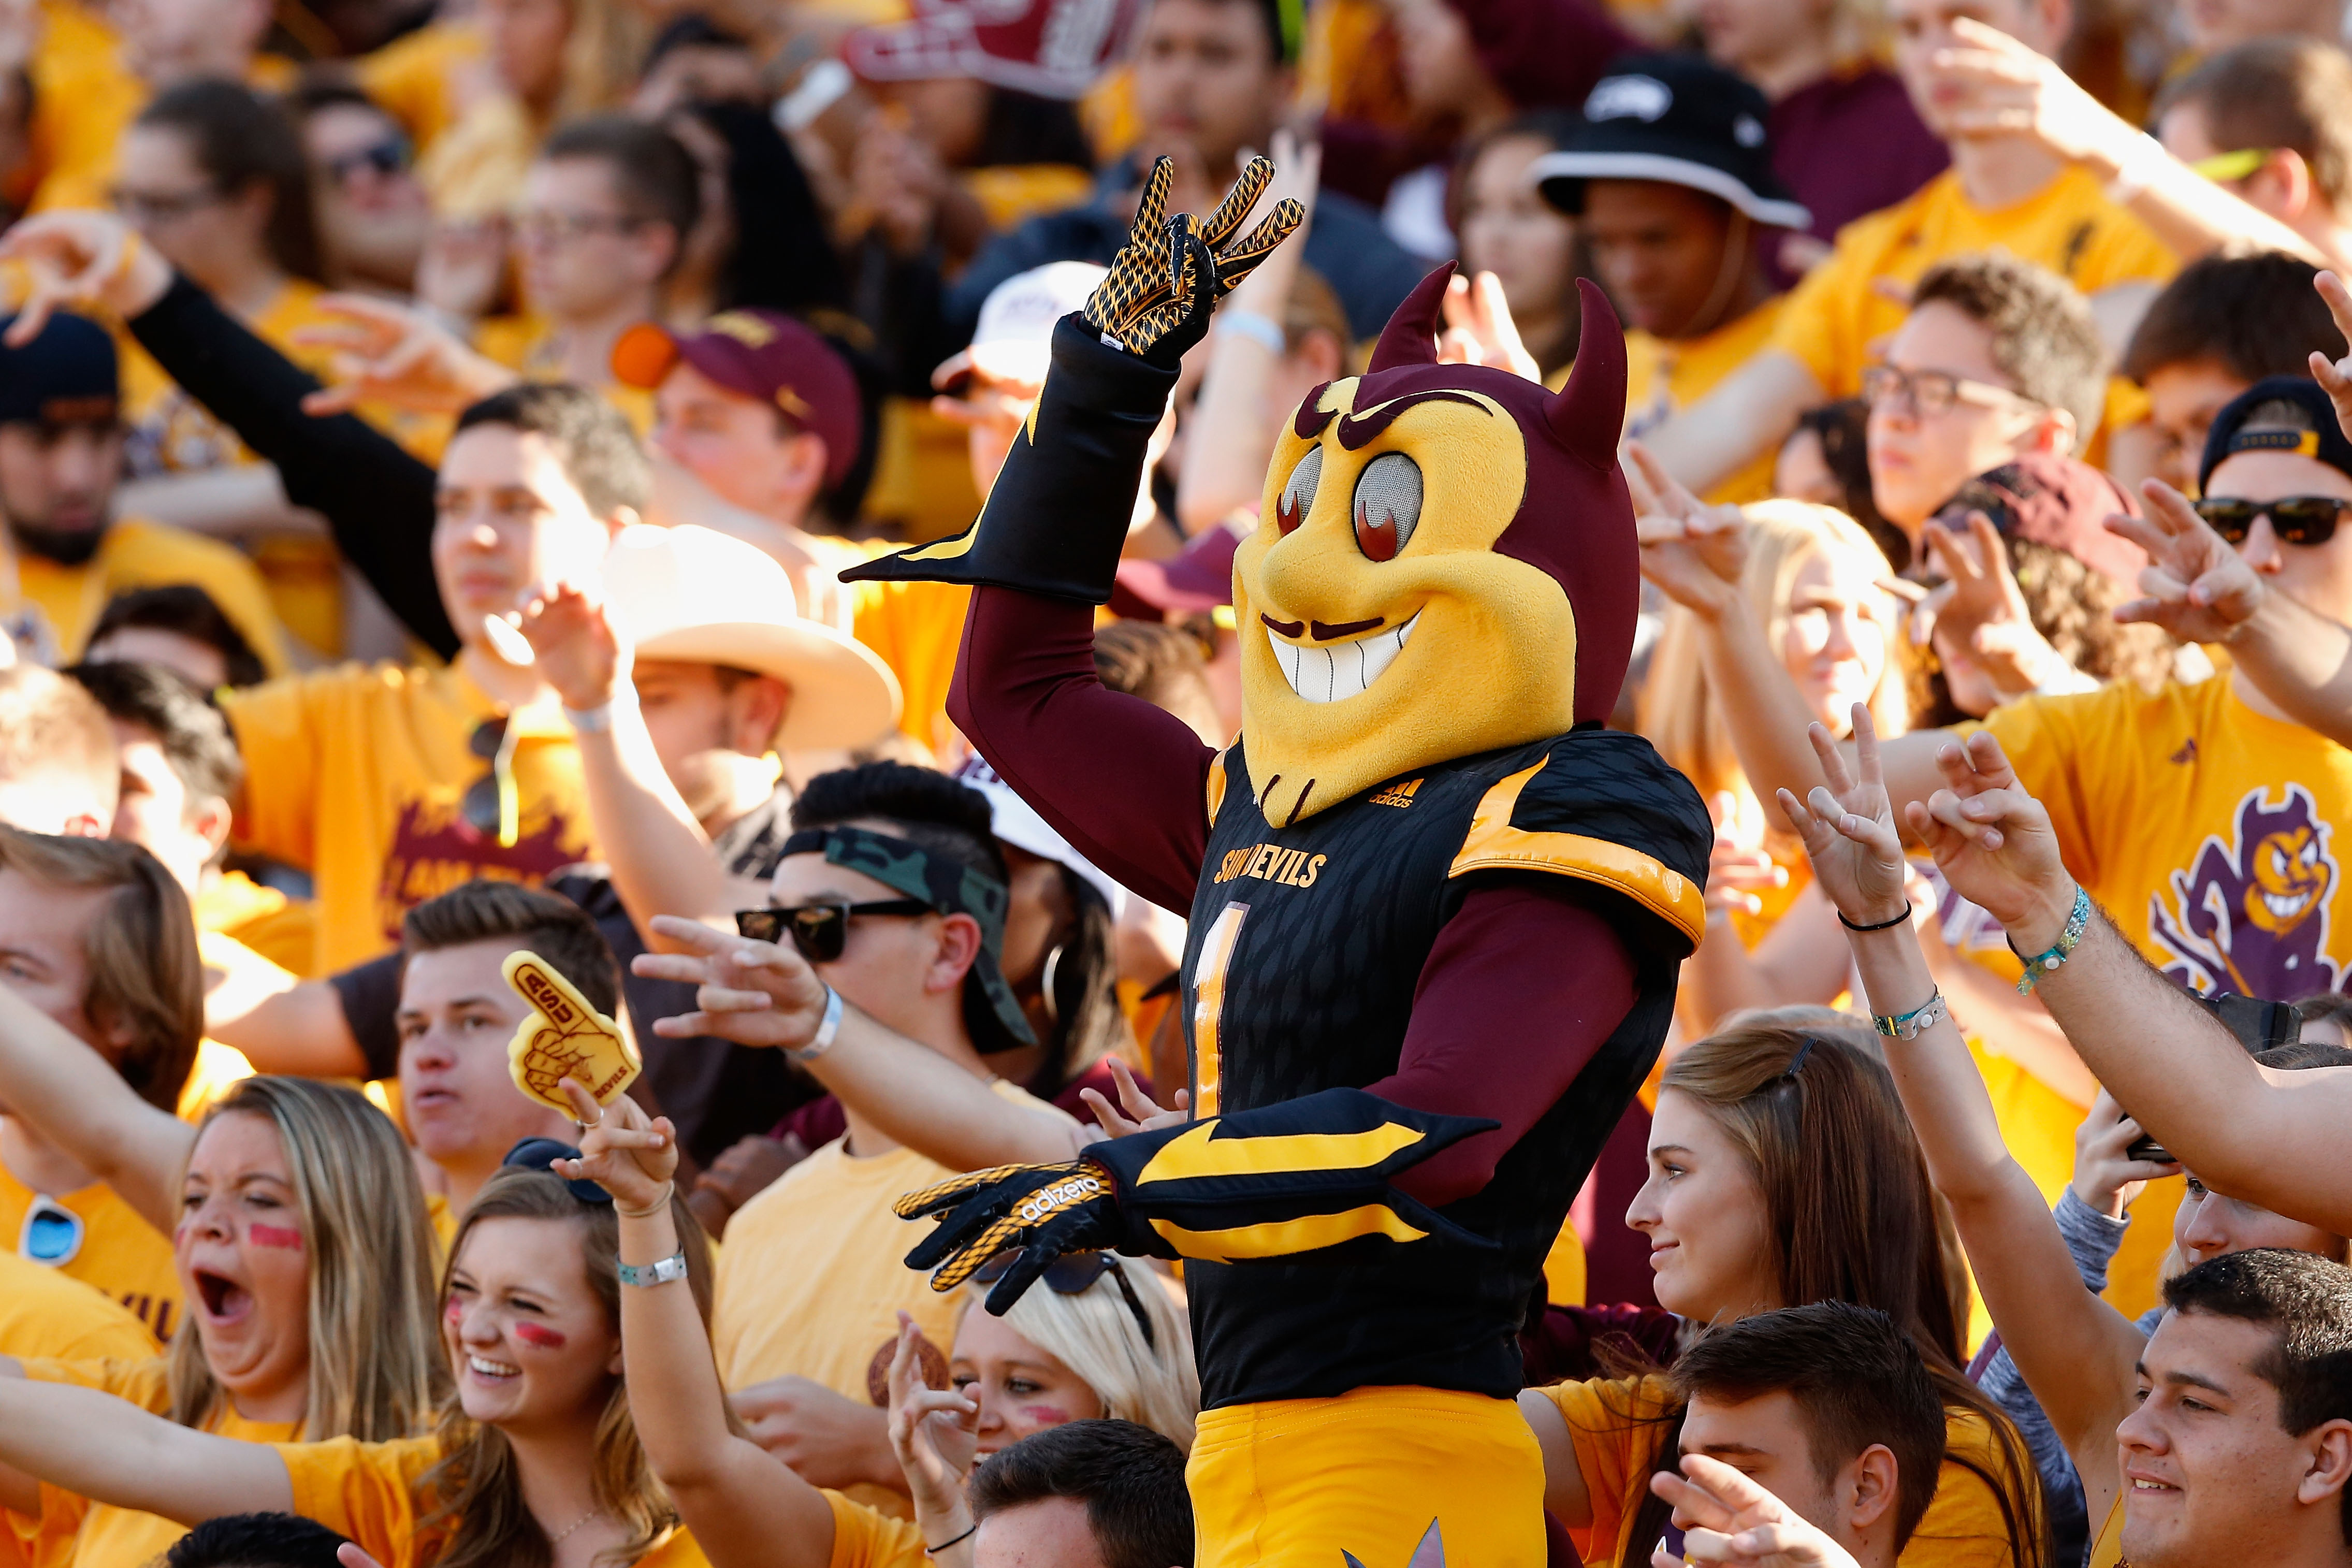 ASU Hockey: Sun Devils fall in game two against Omaha - House of Sparky